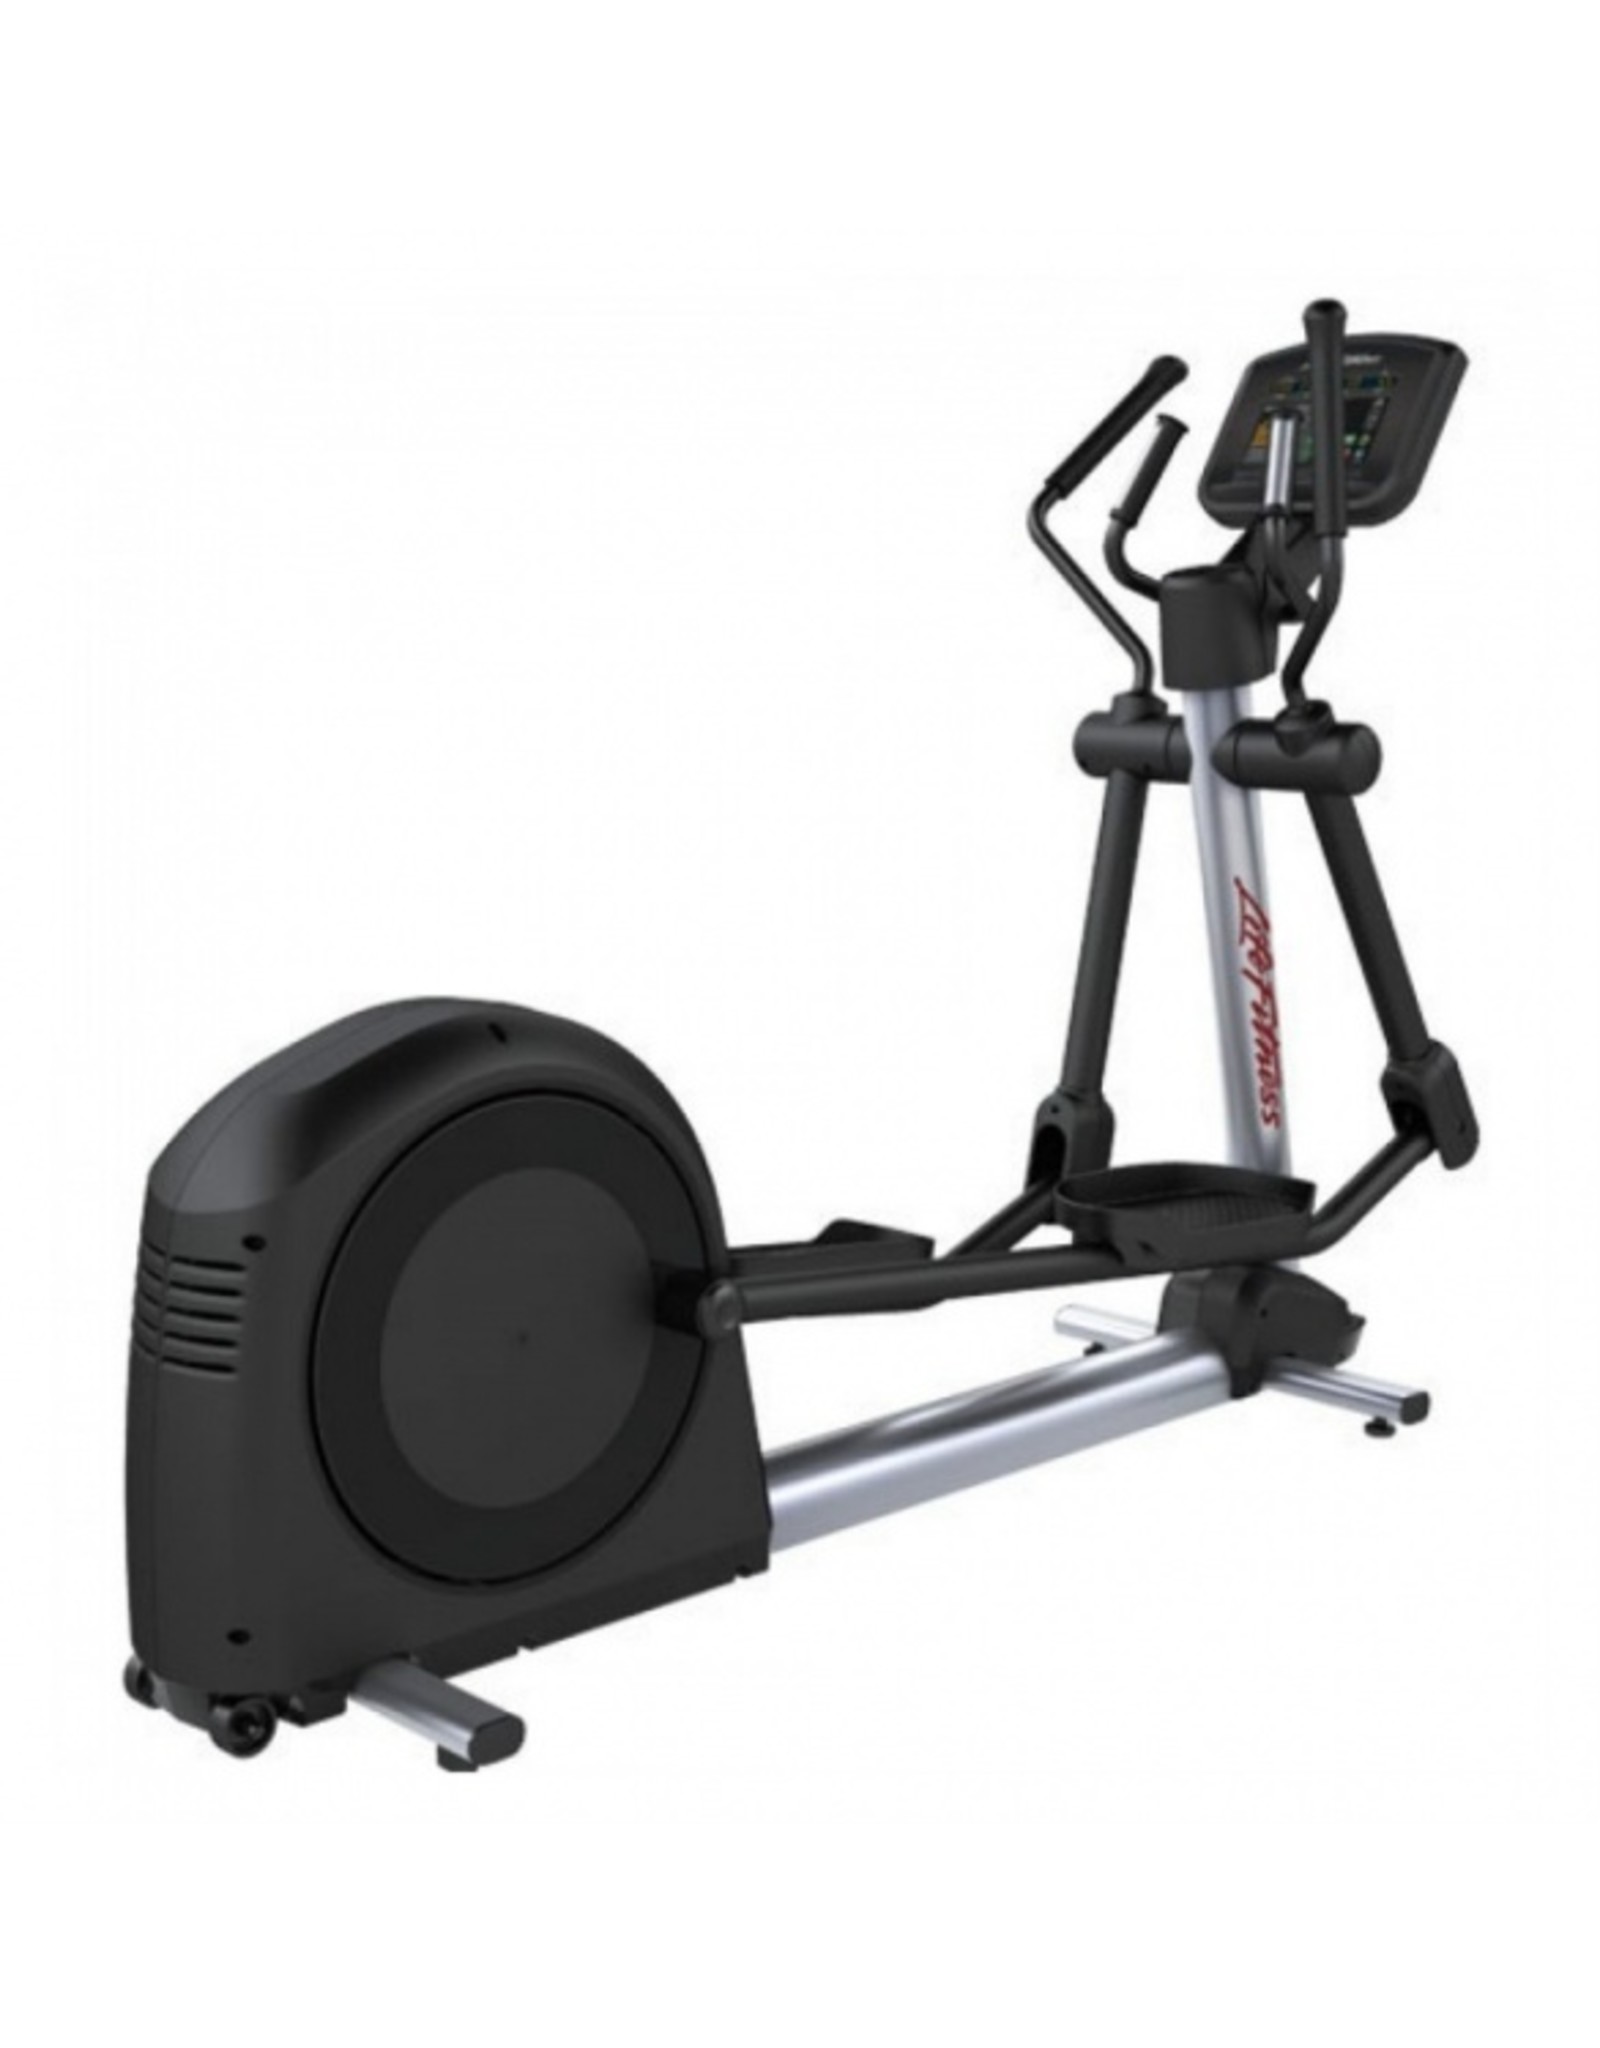 Life Fitness Activity series cross trainer with LED console-dut